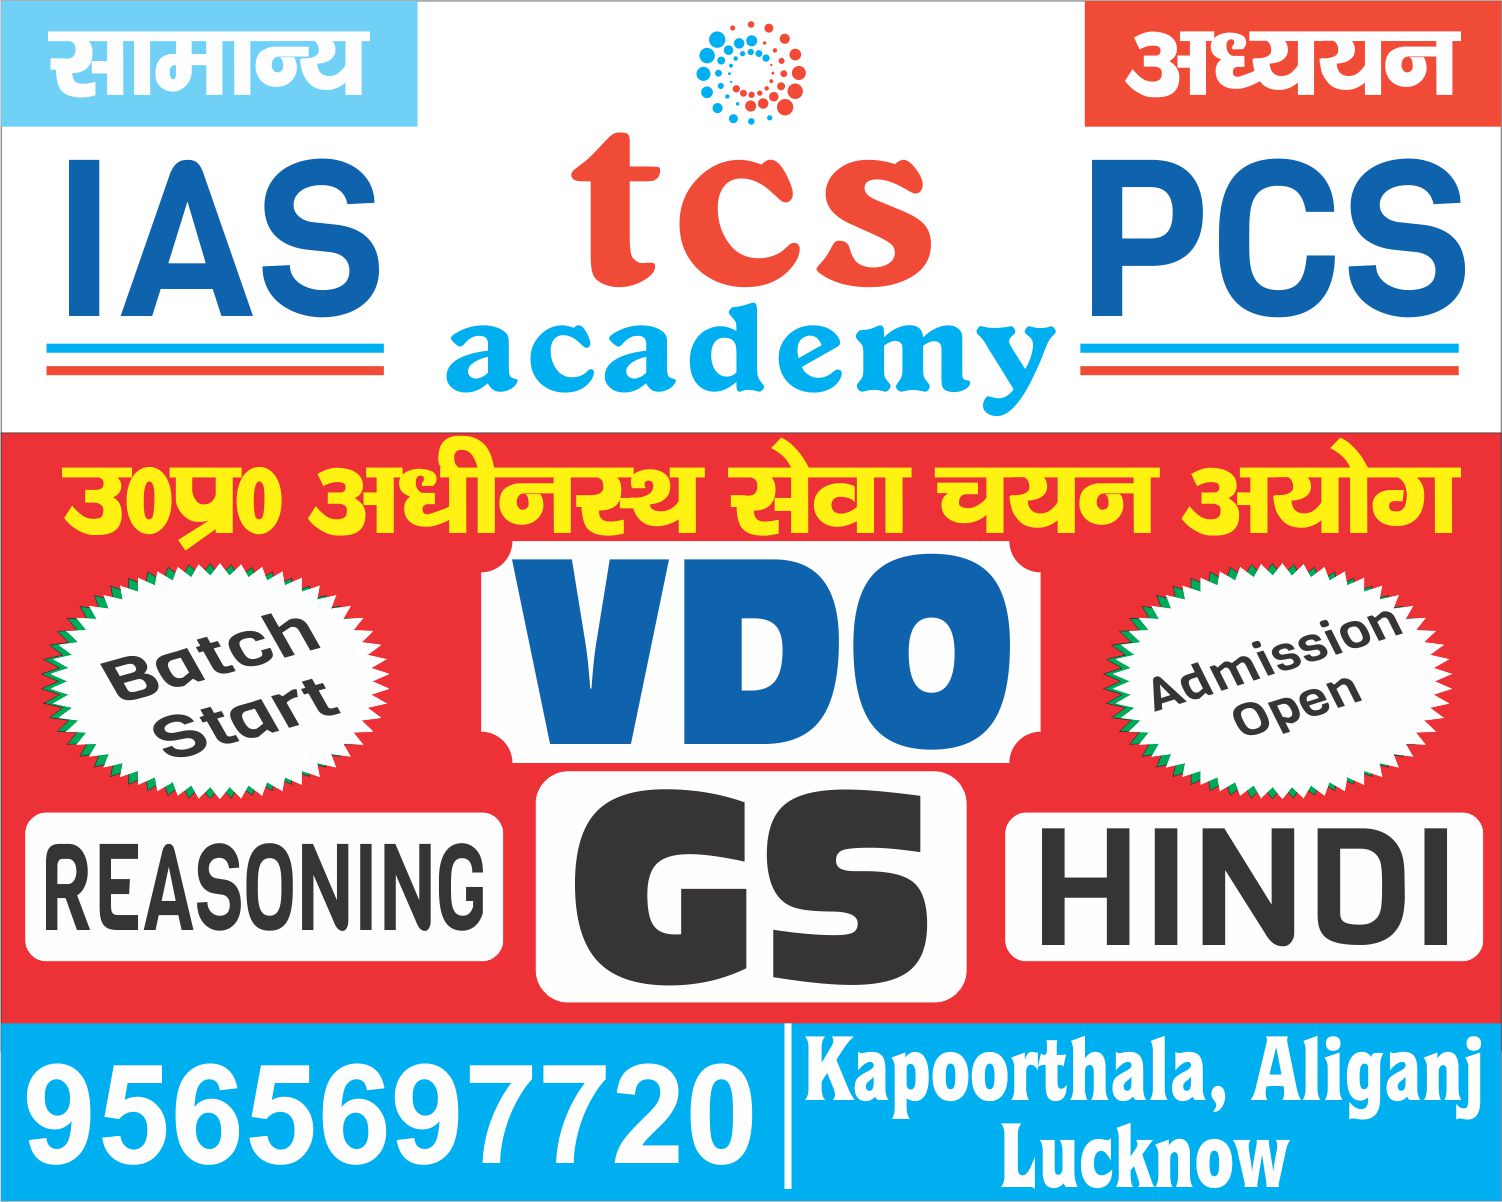 Upsssc VDO coaching in Lucknow